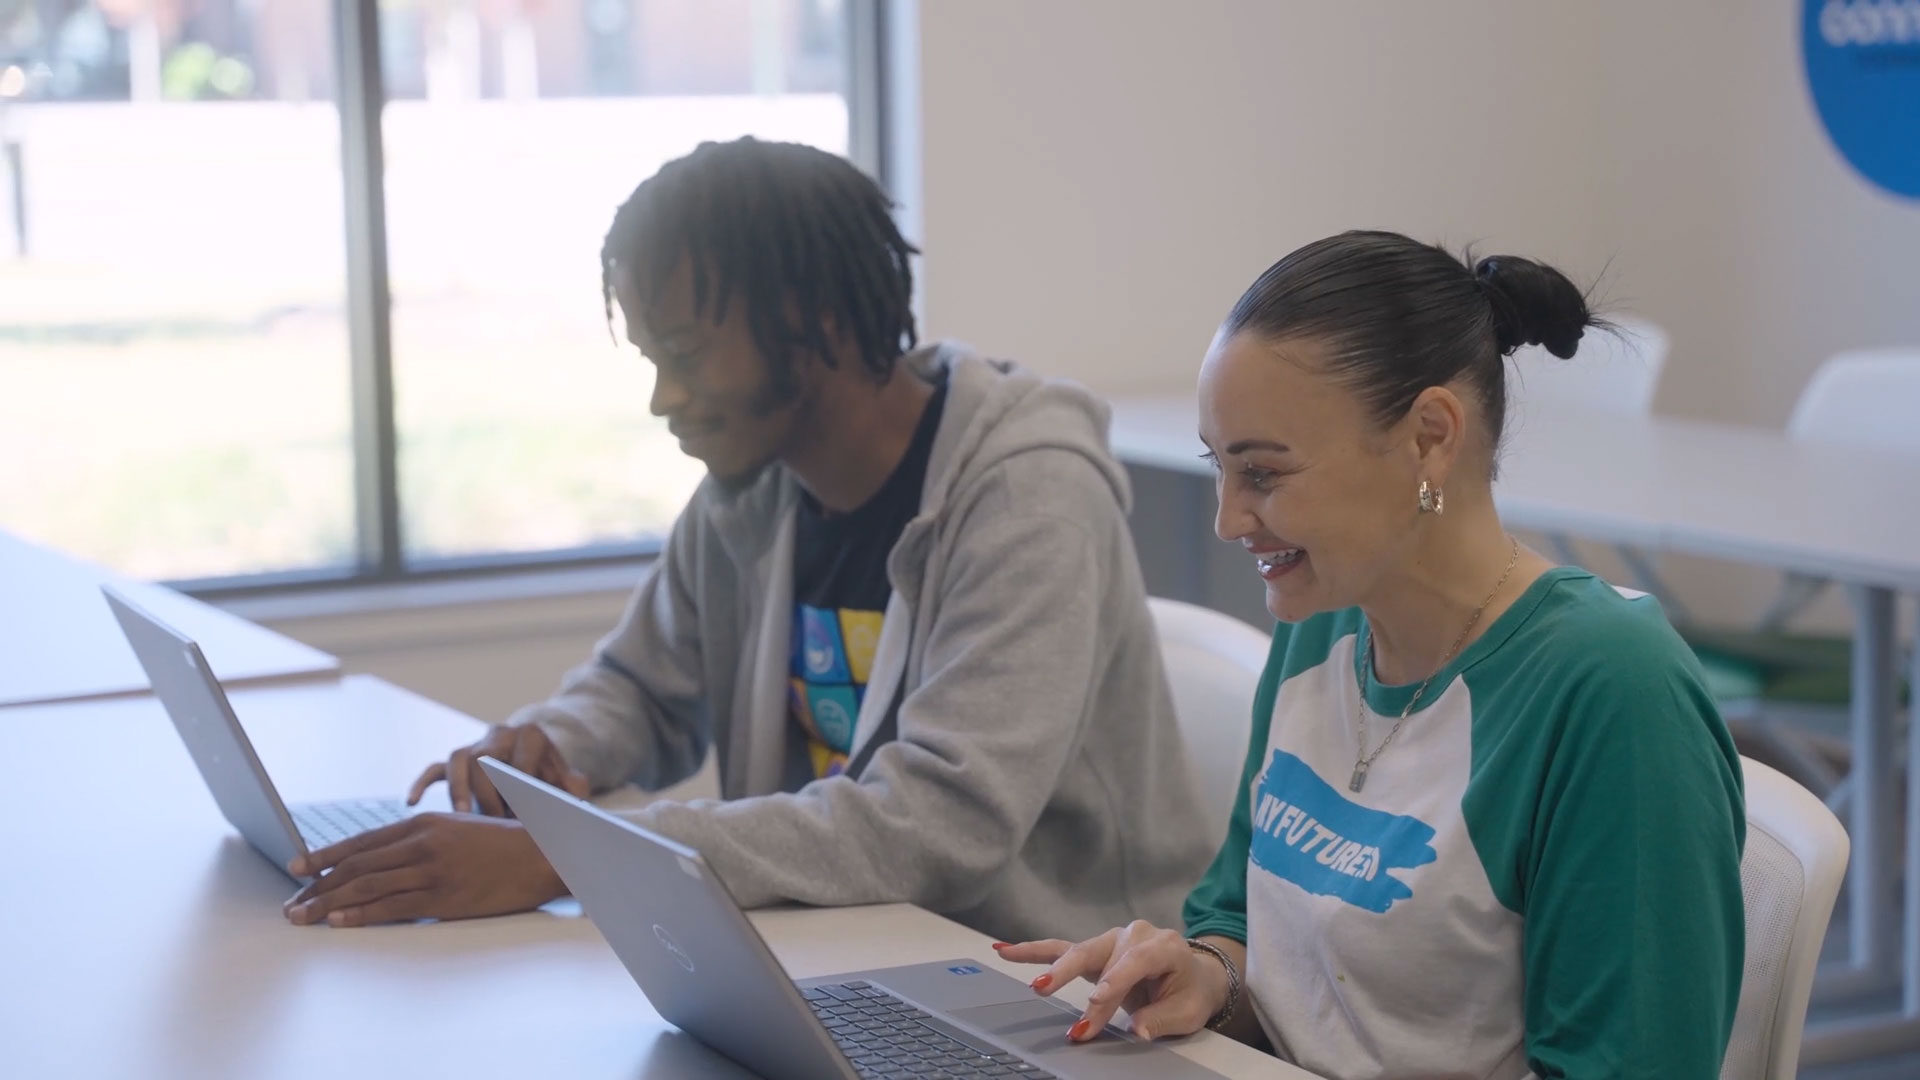 AT&T expands its Connected Learning Center footprint to more locations, including at Boys & Girls Clubs, bringing the benefits of broadband and digital access to even more people.